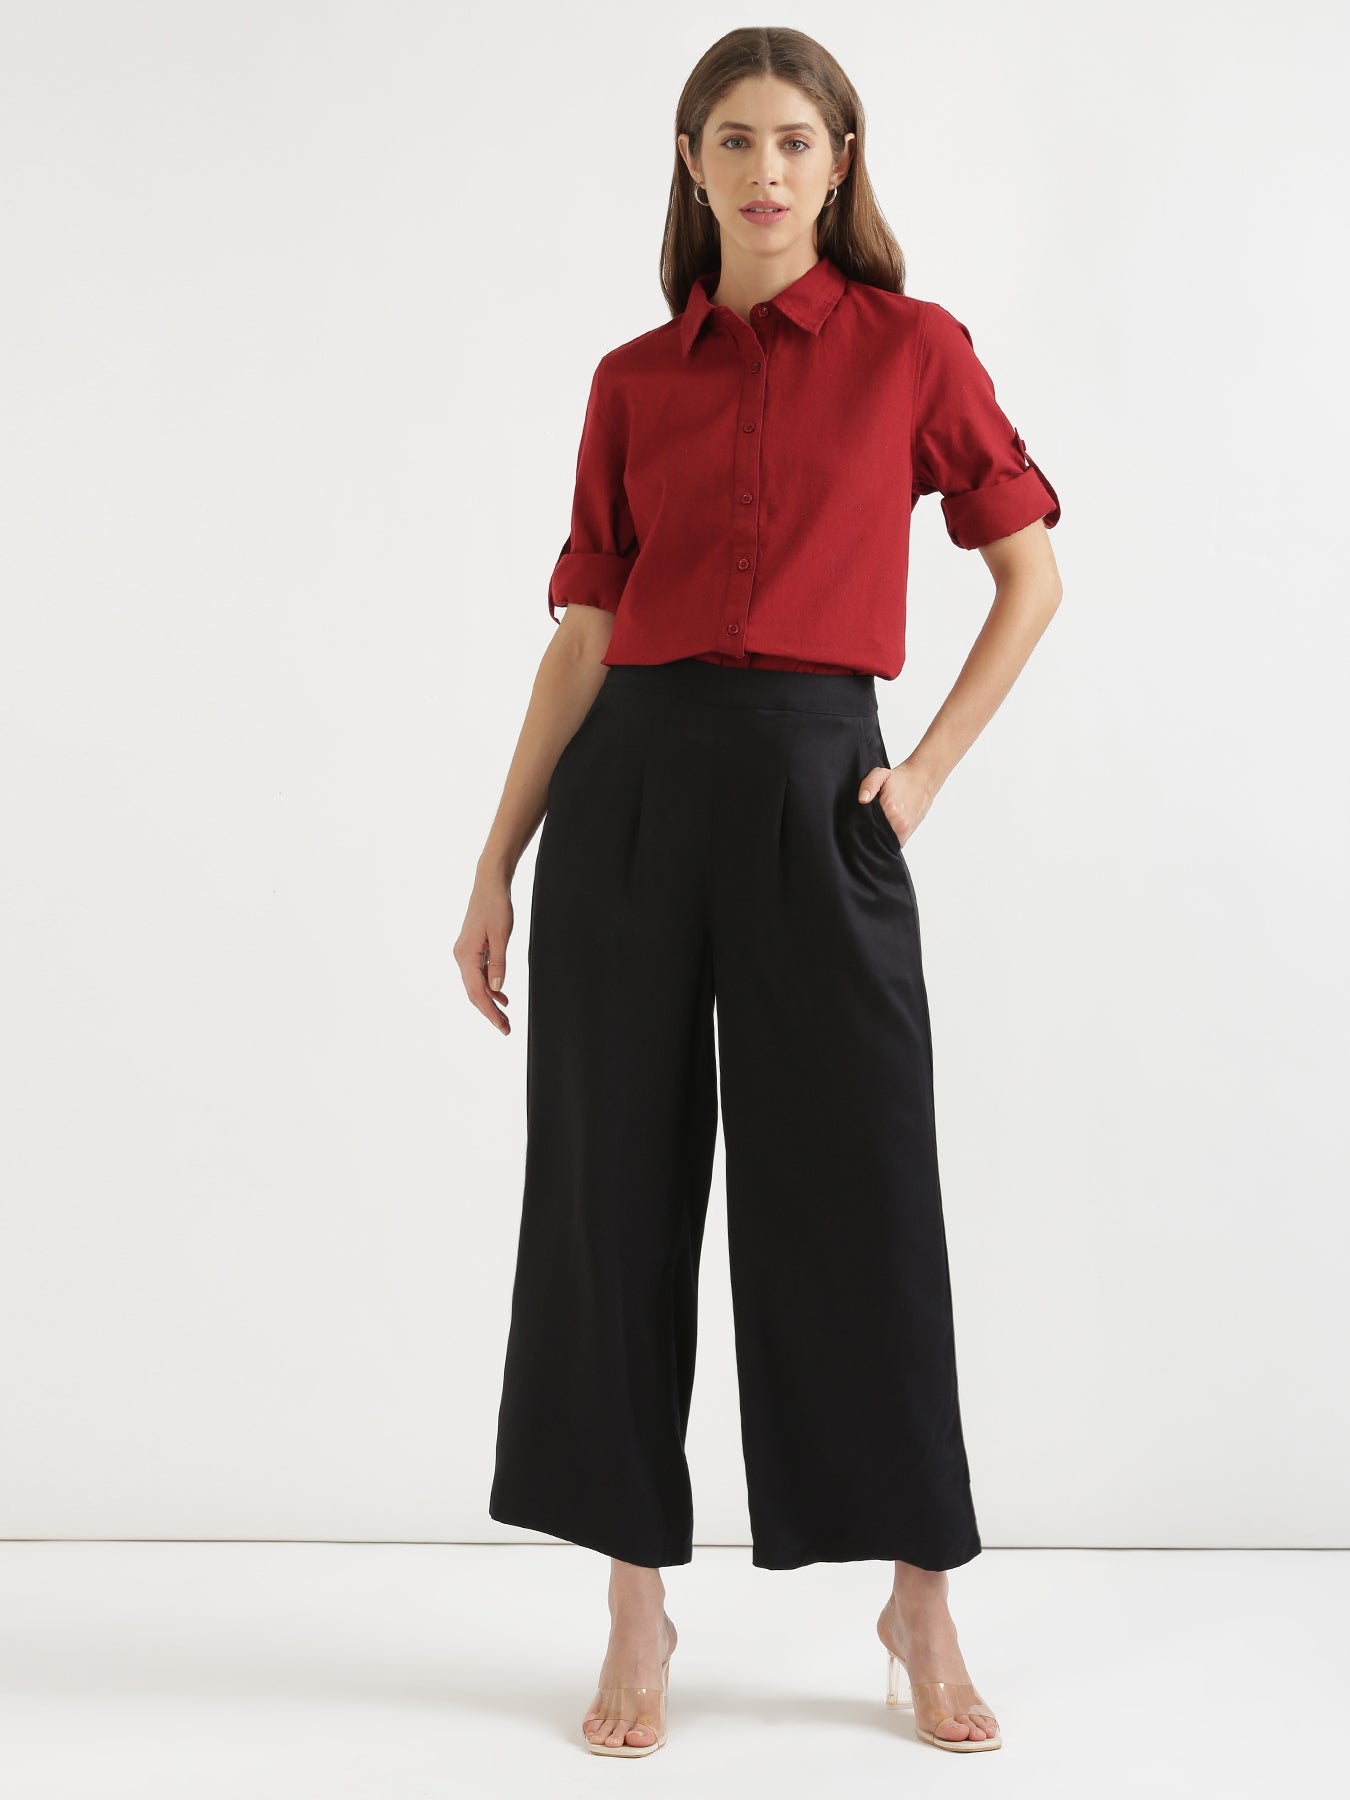 Buy Go Colors-black-palazzo Pants Online at Low Prices in India 